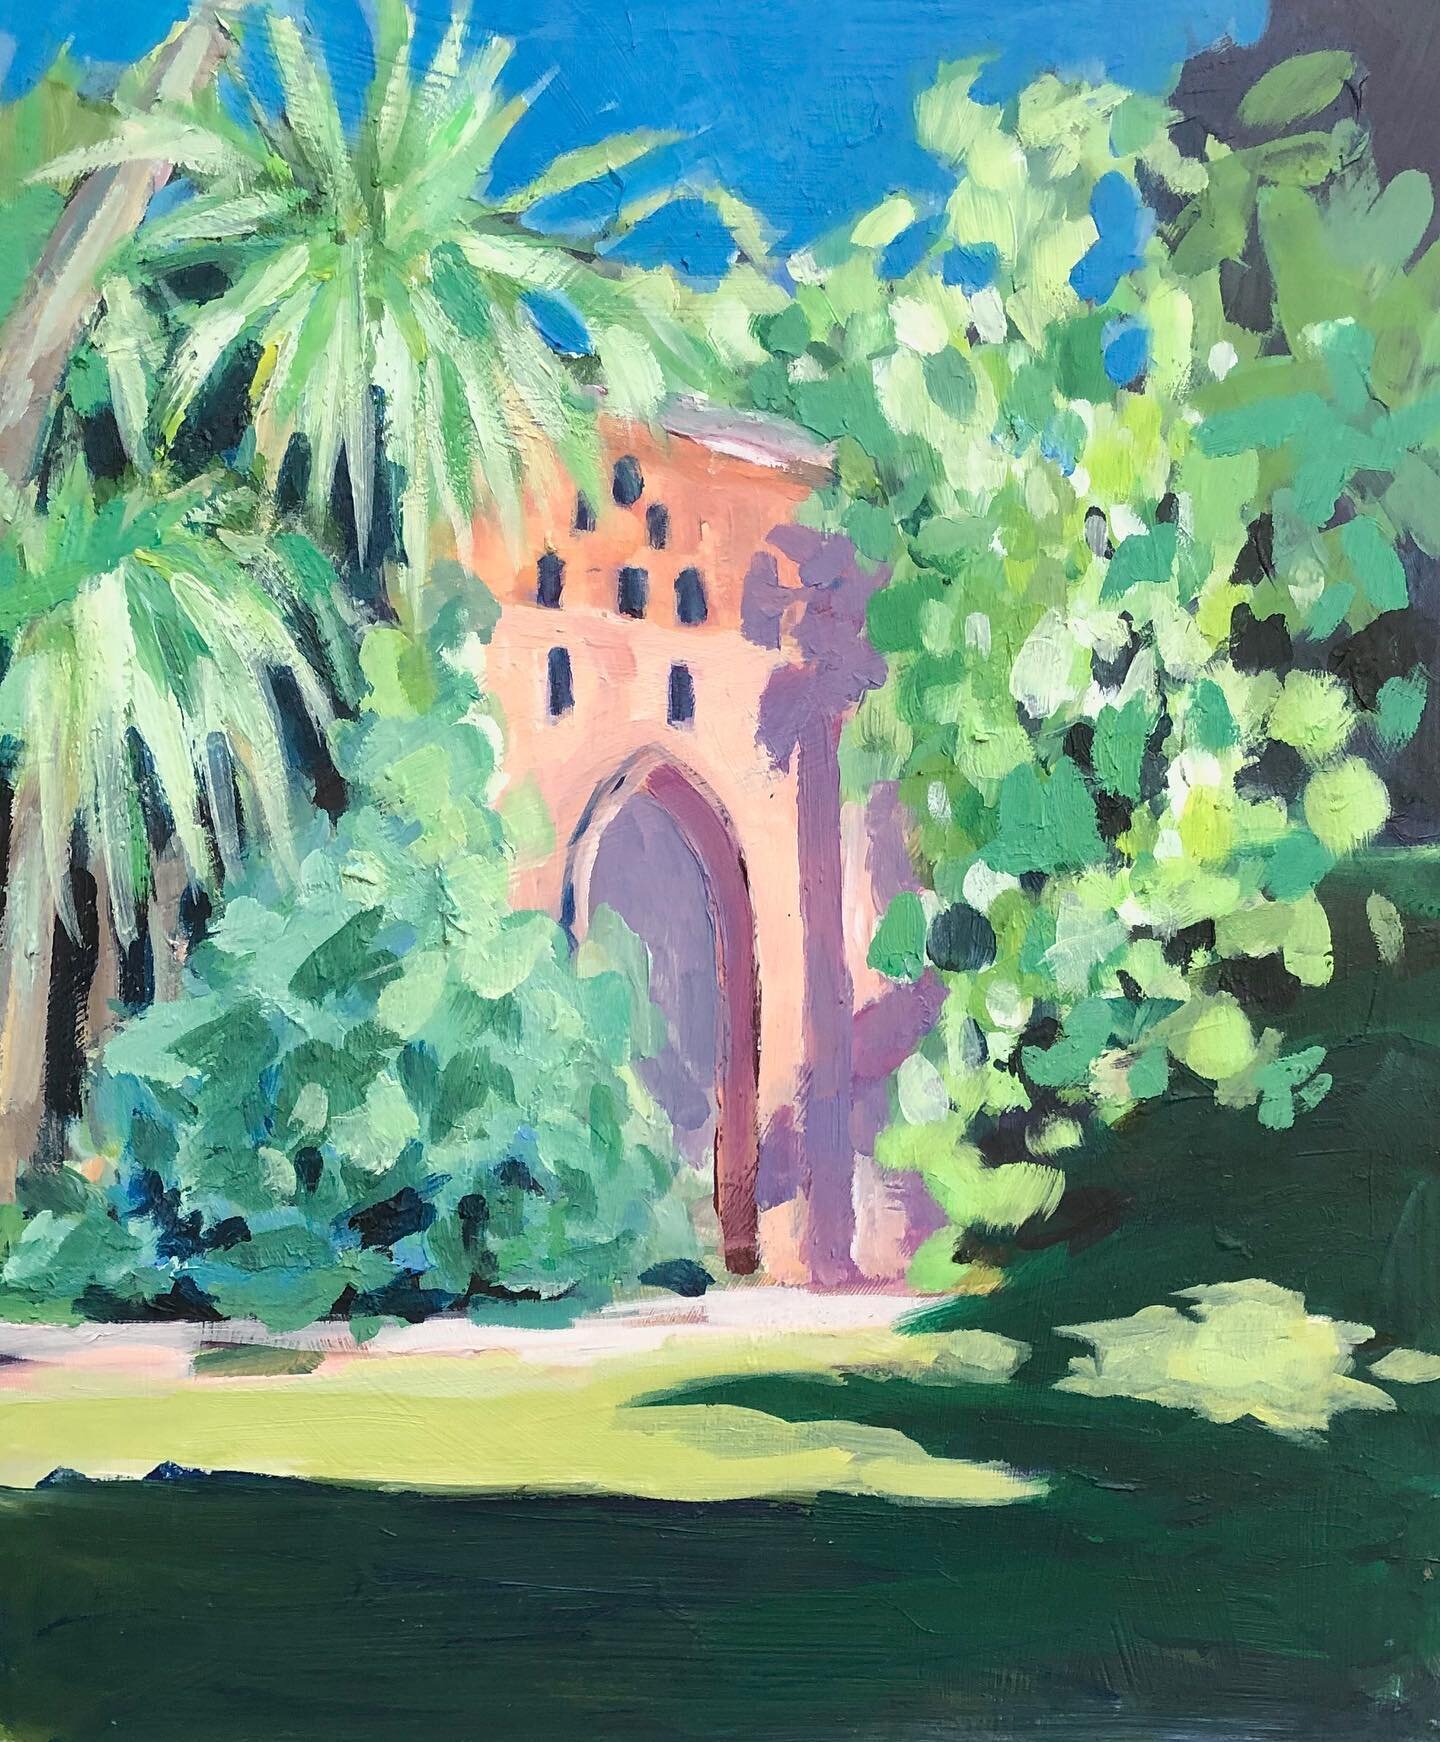 Morocco ? Actually it&rsquo;s the Isle of Wight&hellip;an old water tower converted into a summerhouse. #hughfairfaxoriginals #isleofwightartist #oilpaintings #summer #happyholidays